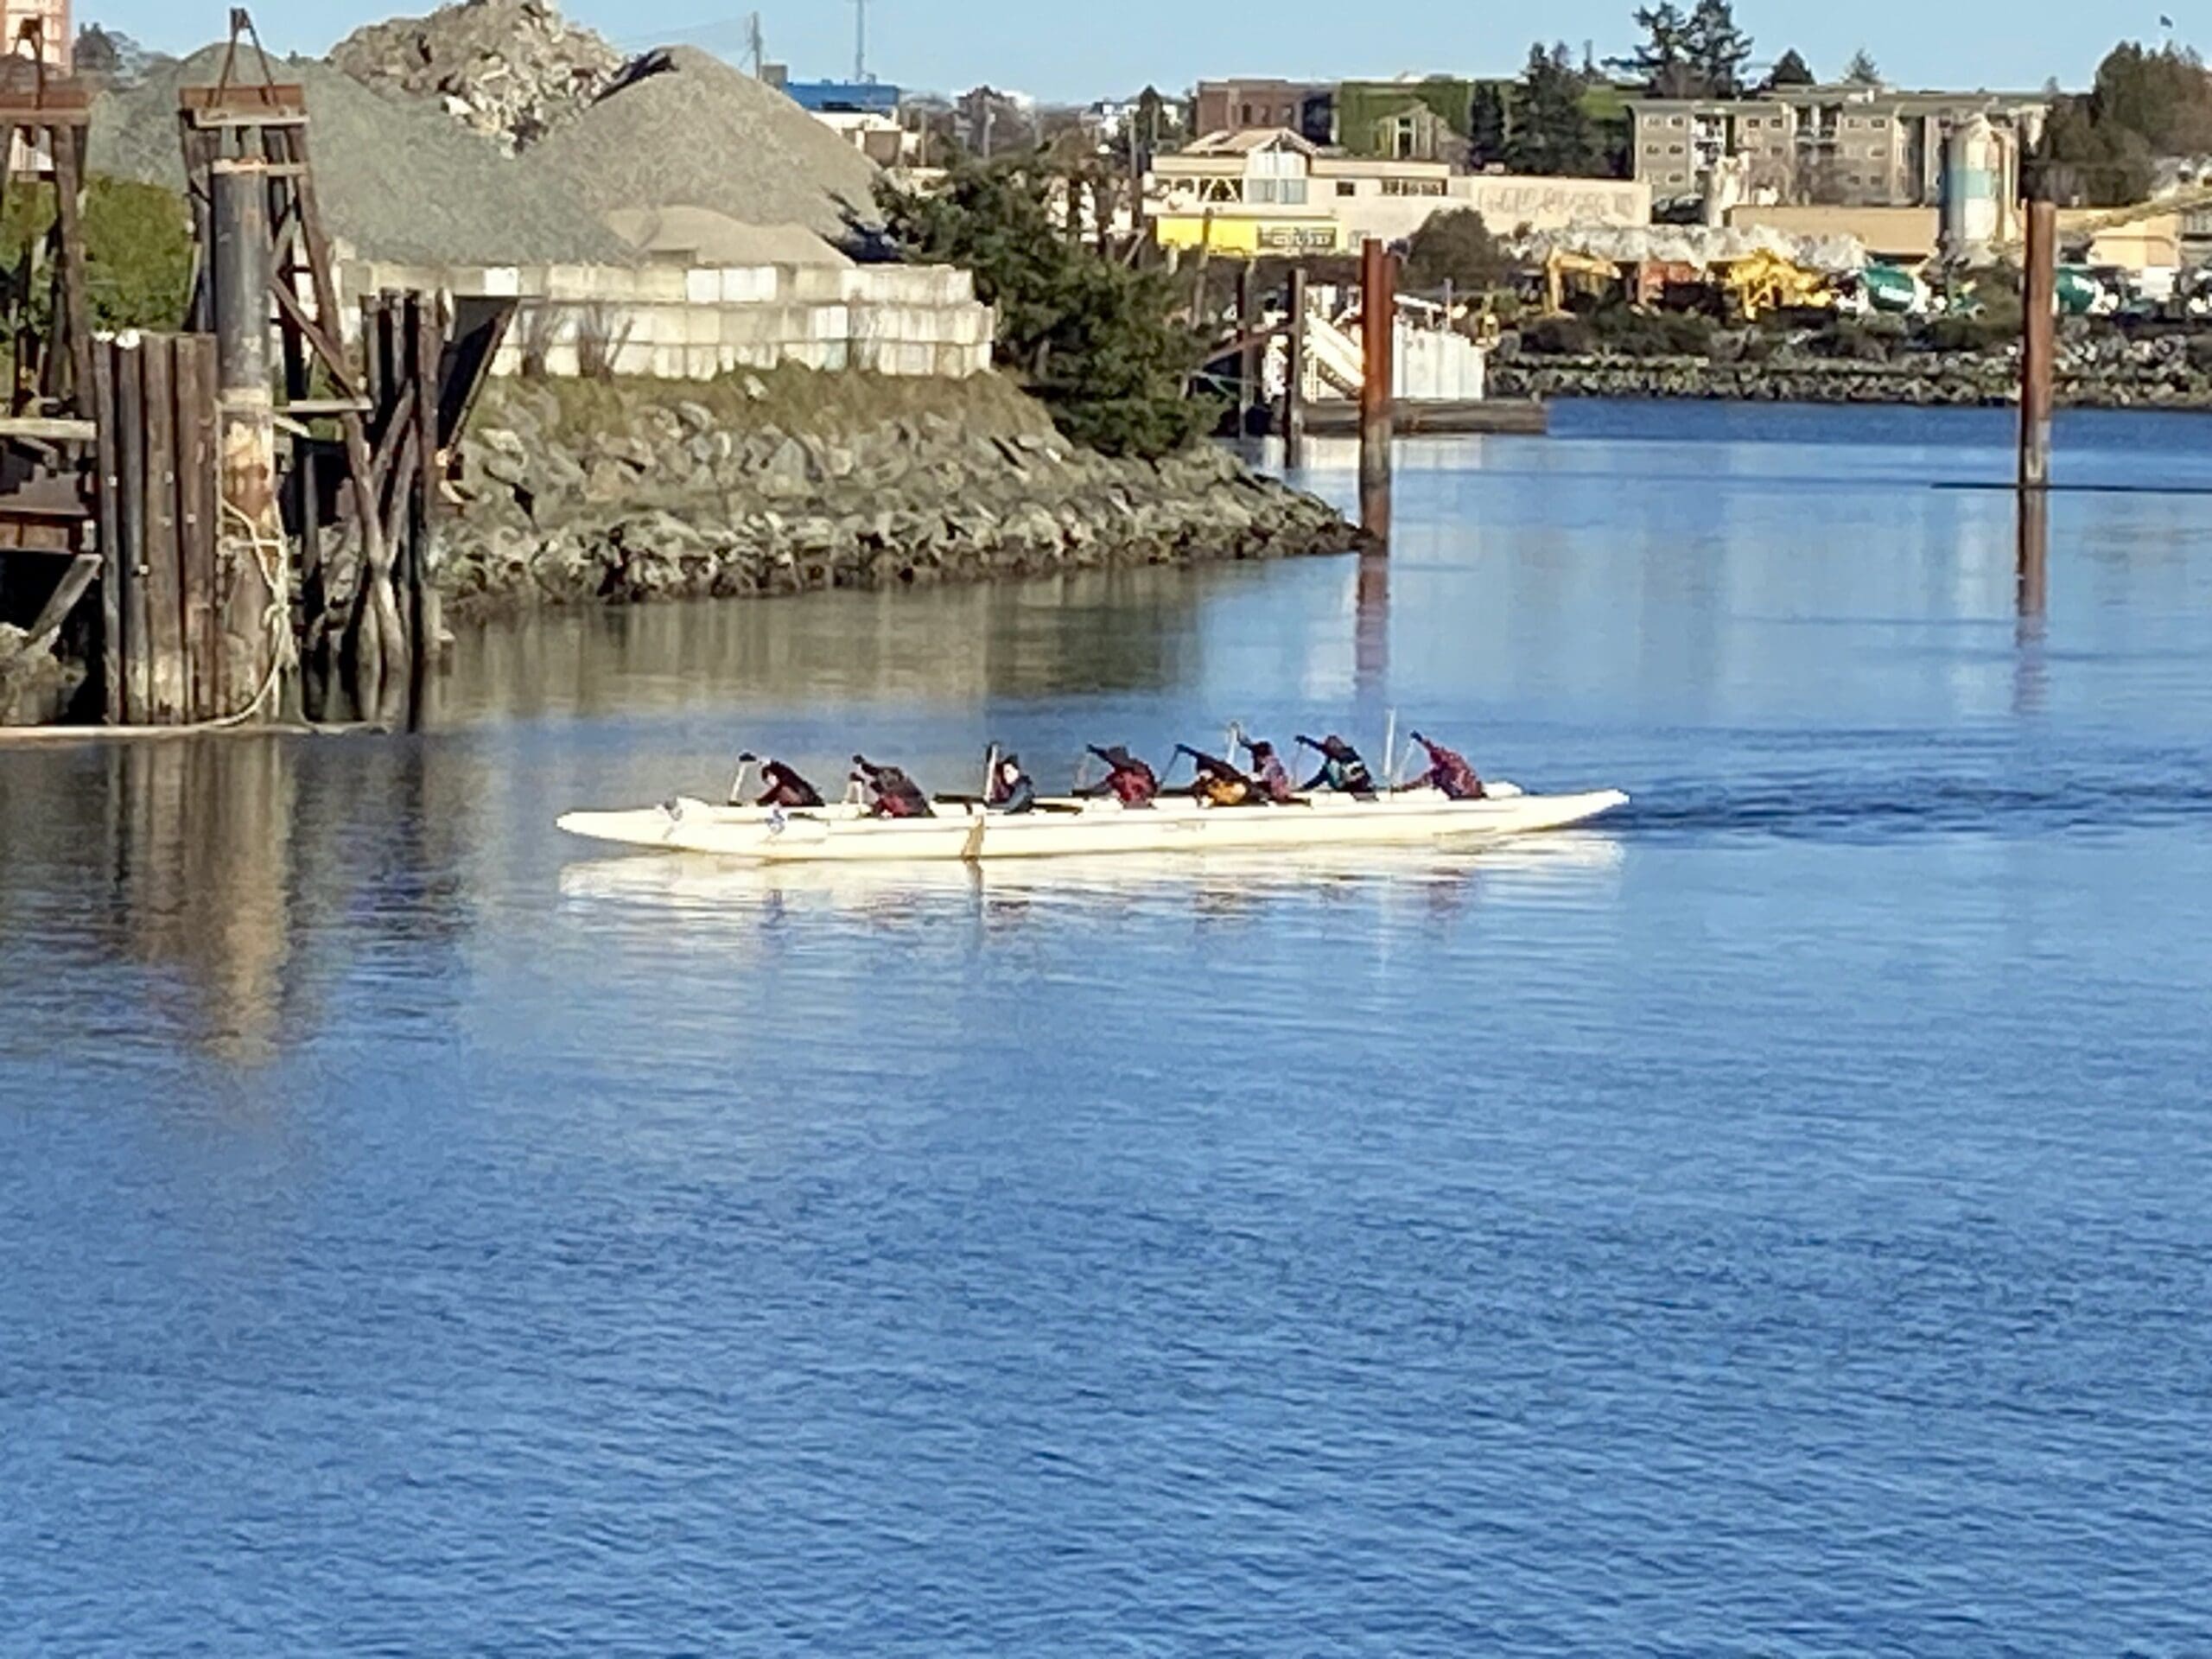 Lots of teams practice water sports  in the Gorge Waterway and Victoria Harbour.